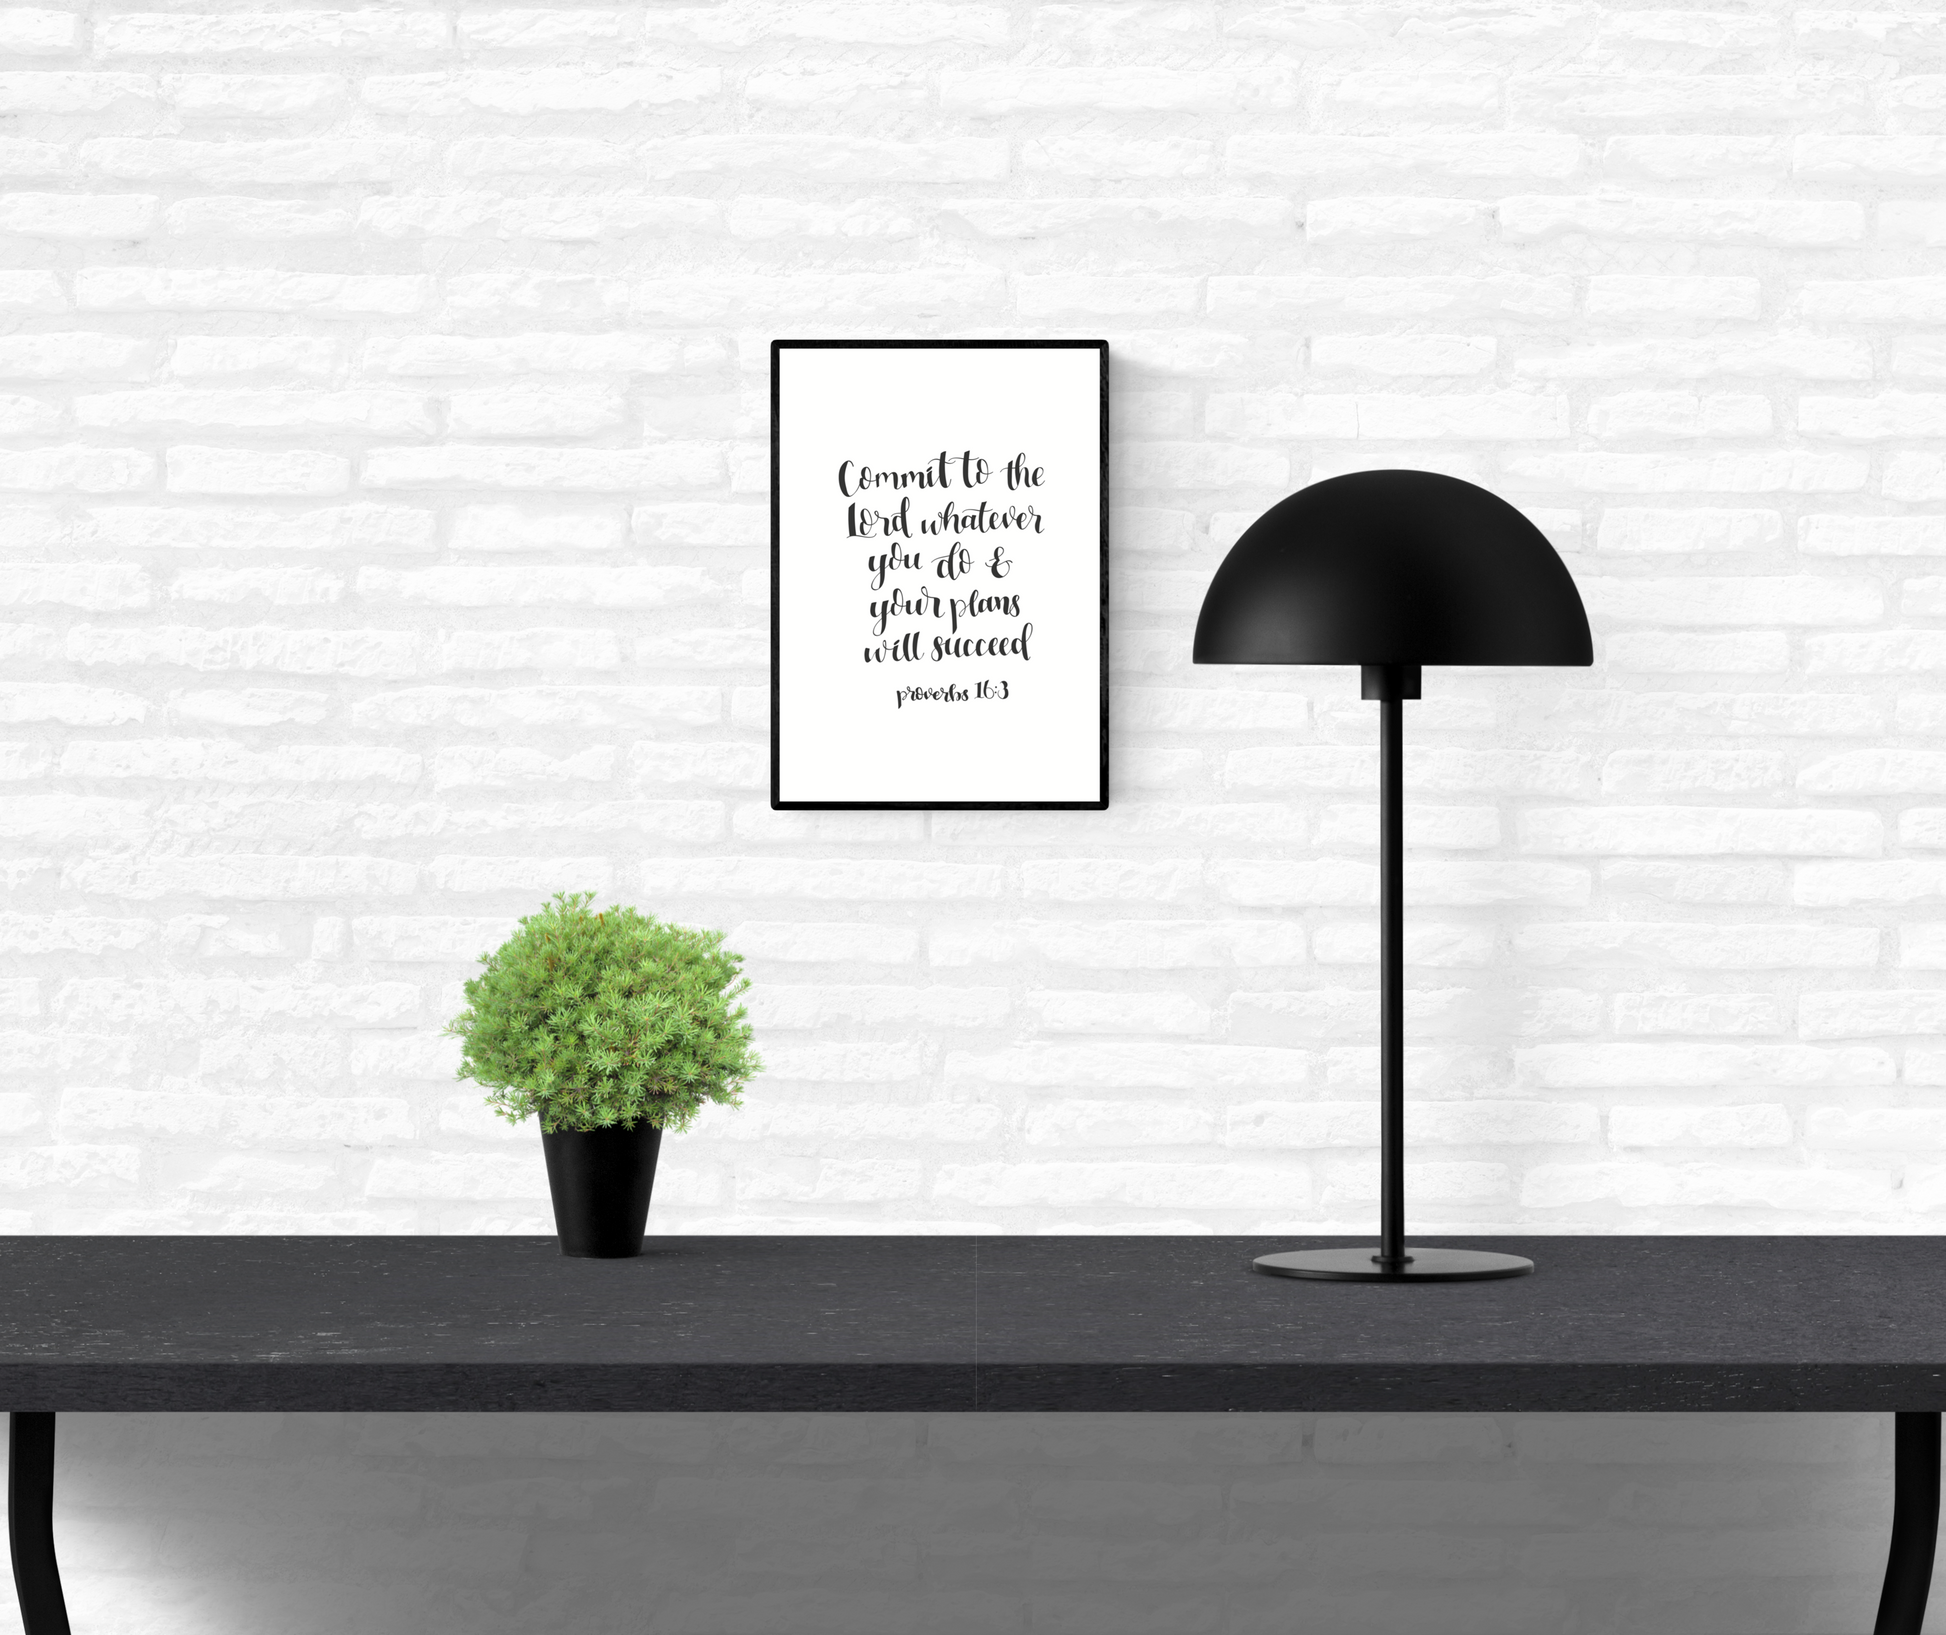 Quote wall print of Holy Bible scripture verse Proverbs 16:3 mounted on an interior white brick wall